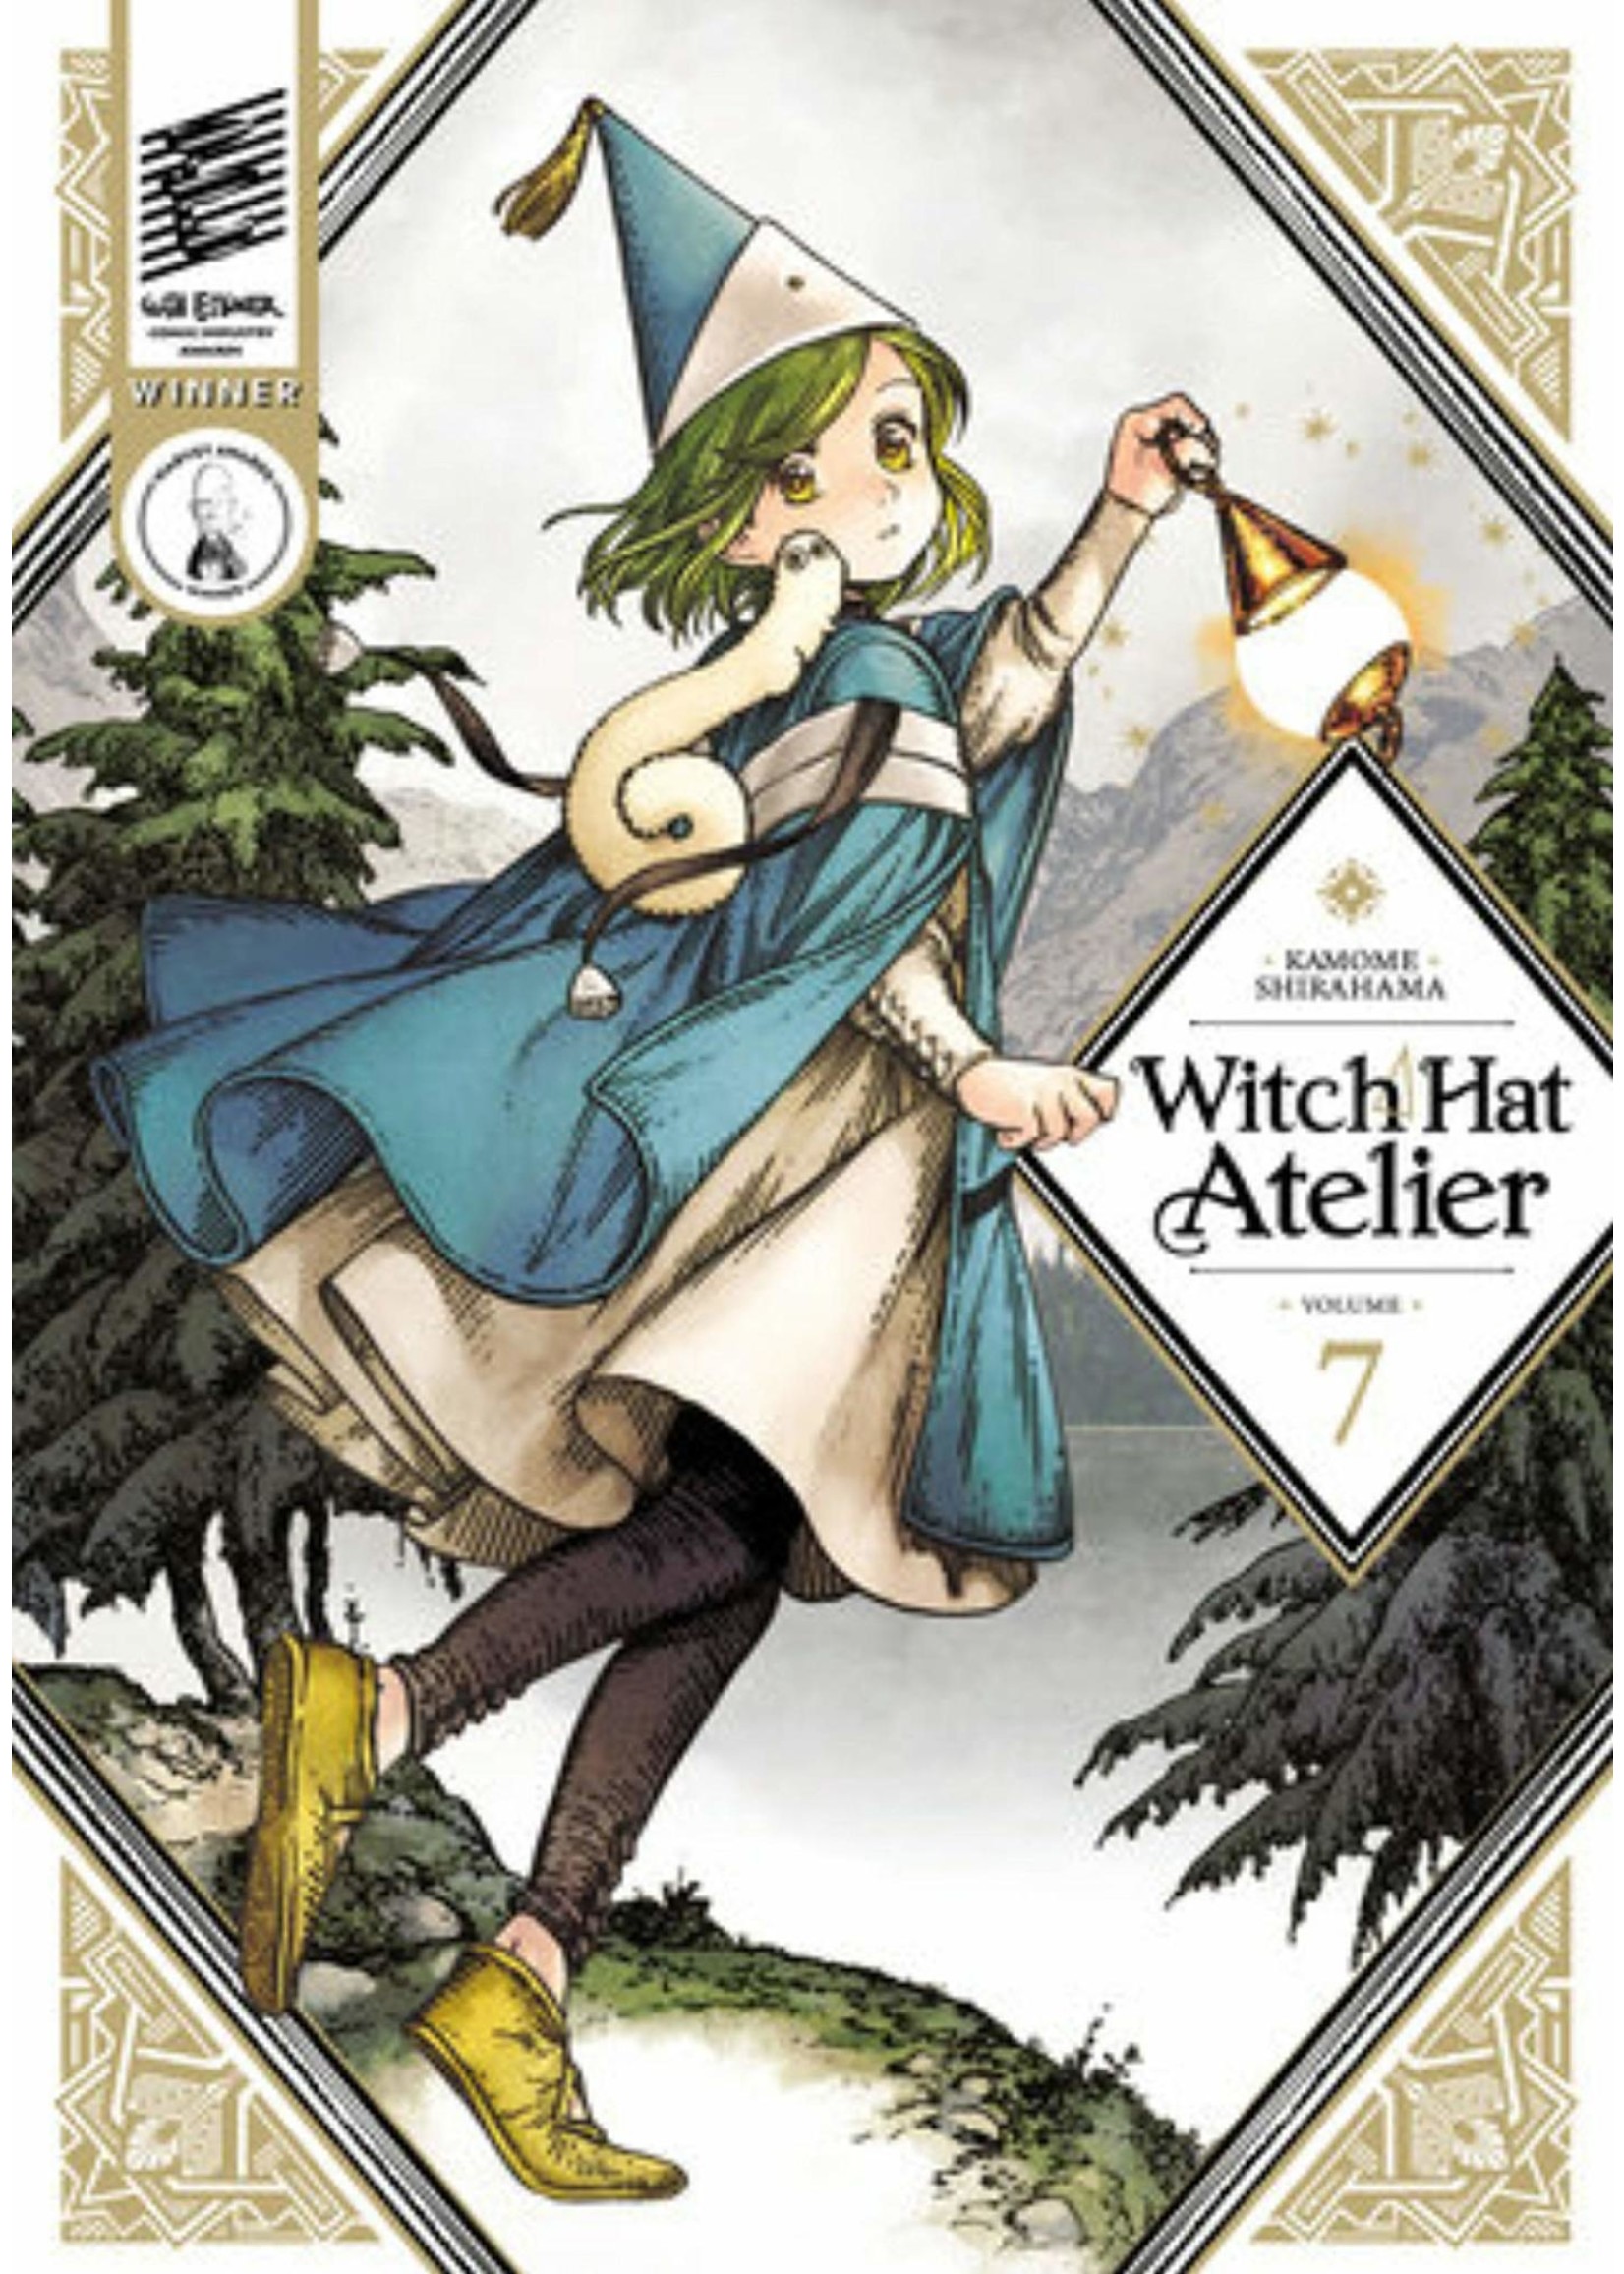 Witch Hat Atelier, Vol. 7 by Kamome Shirahama